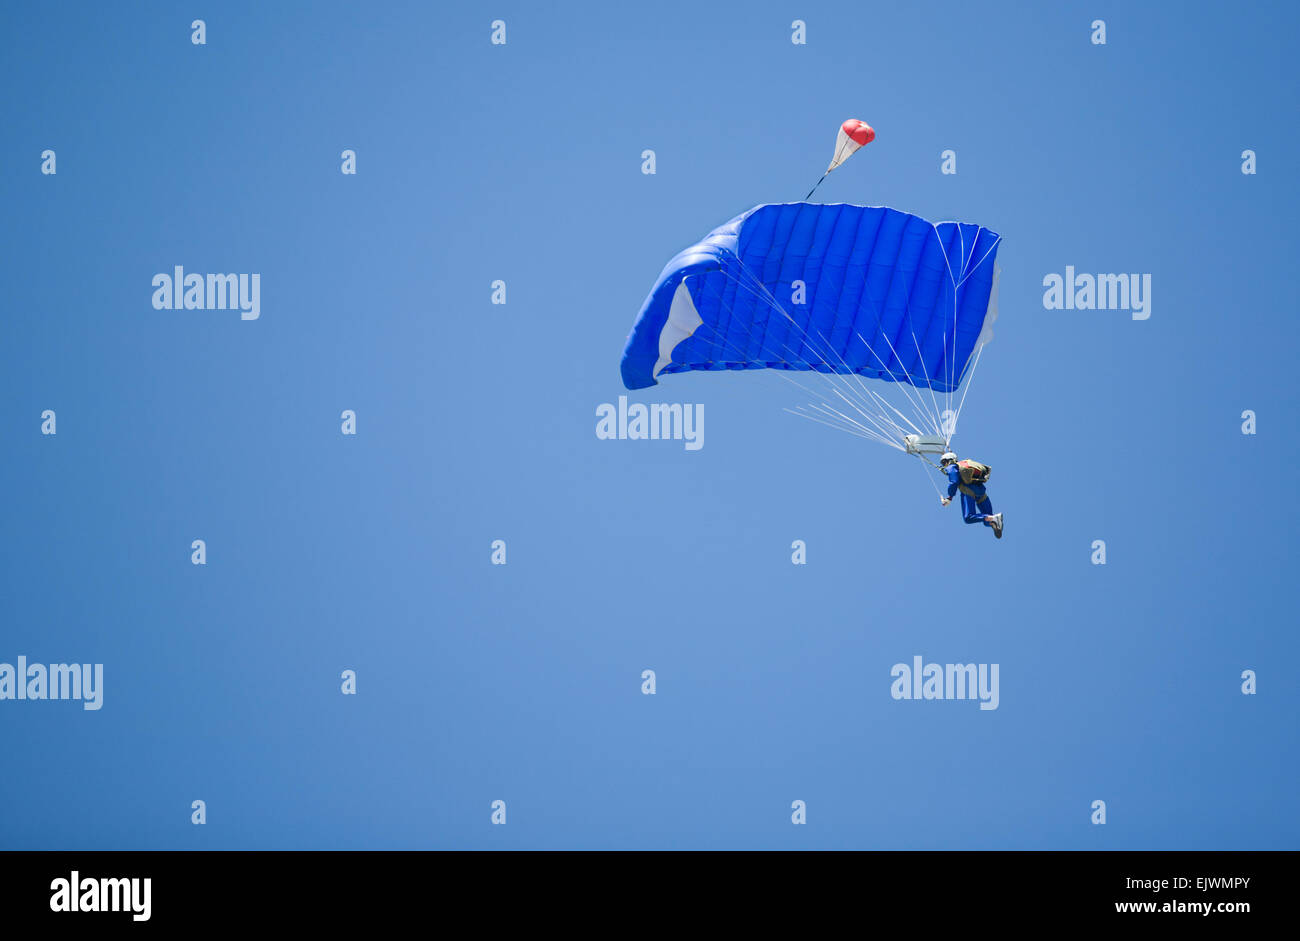 A skydiver performing skydiving with blue sky in the background Stock Photo